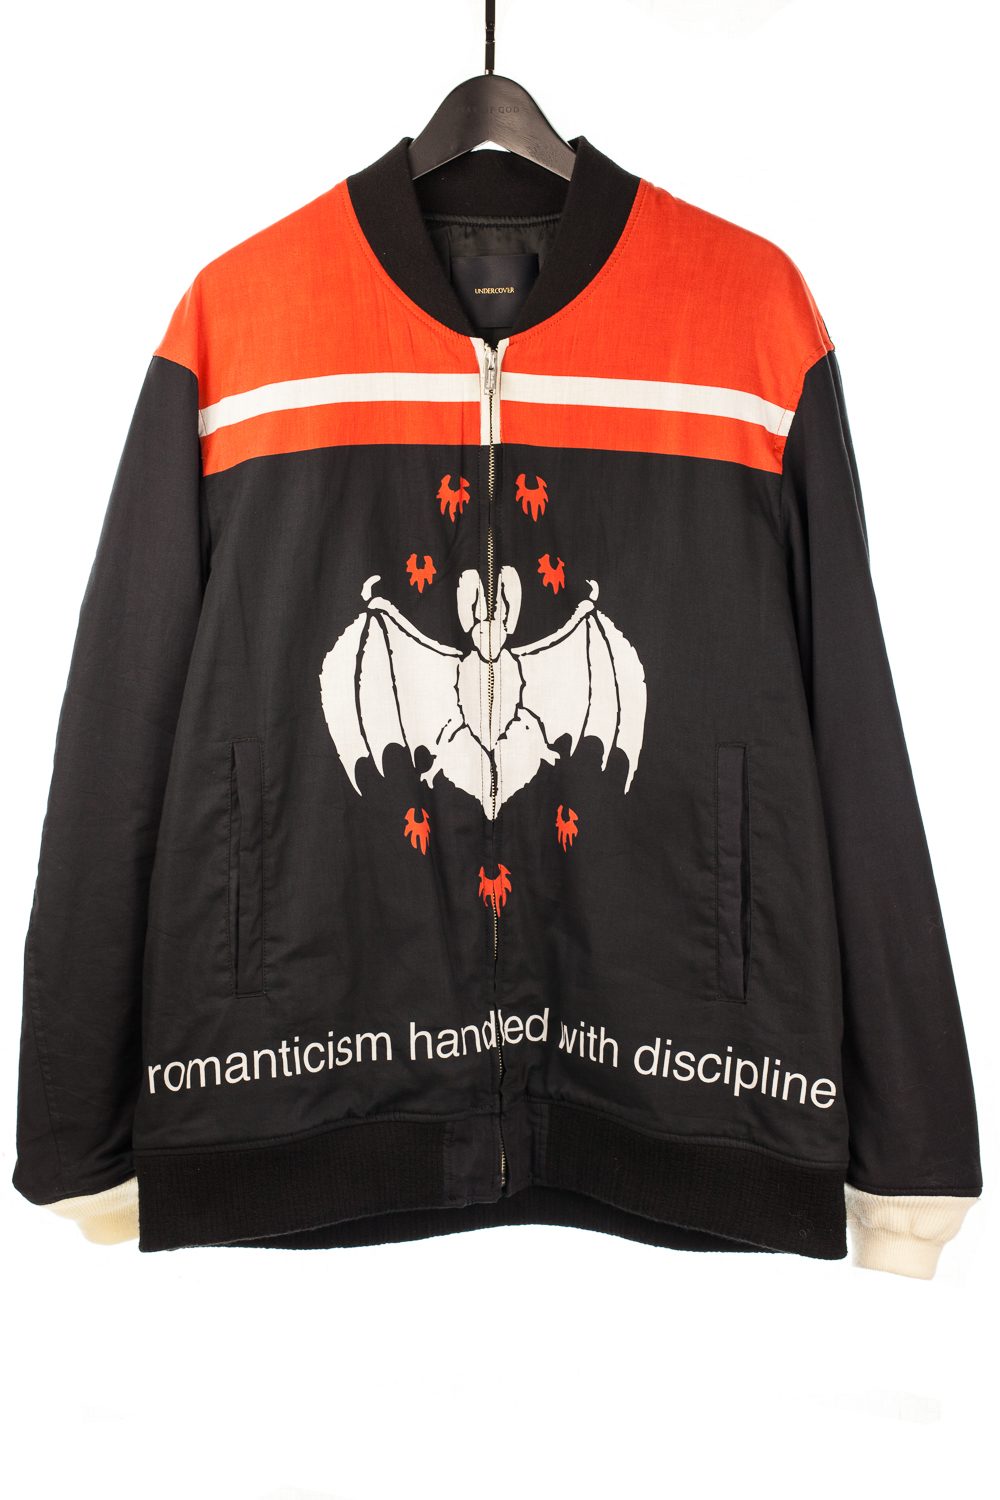 SS17 “Romanticism Handled With Discipline” Bomber Jacket